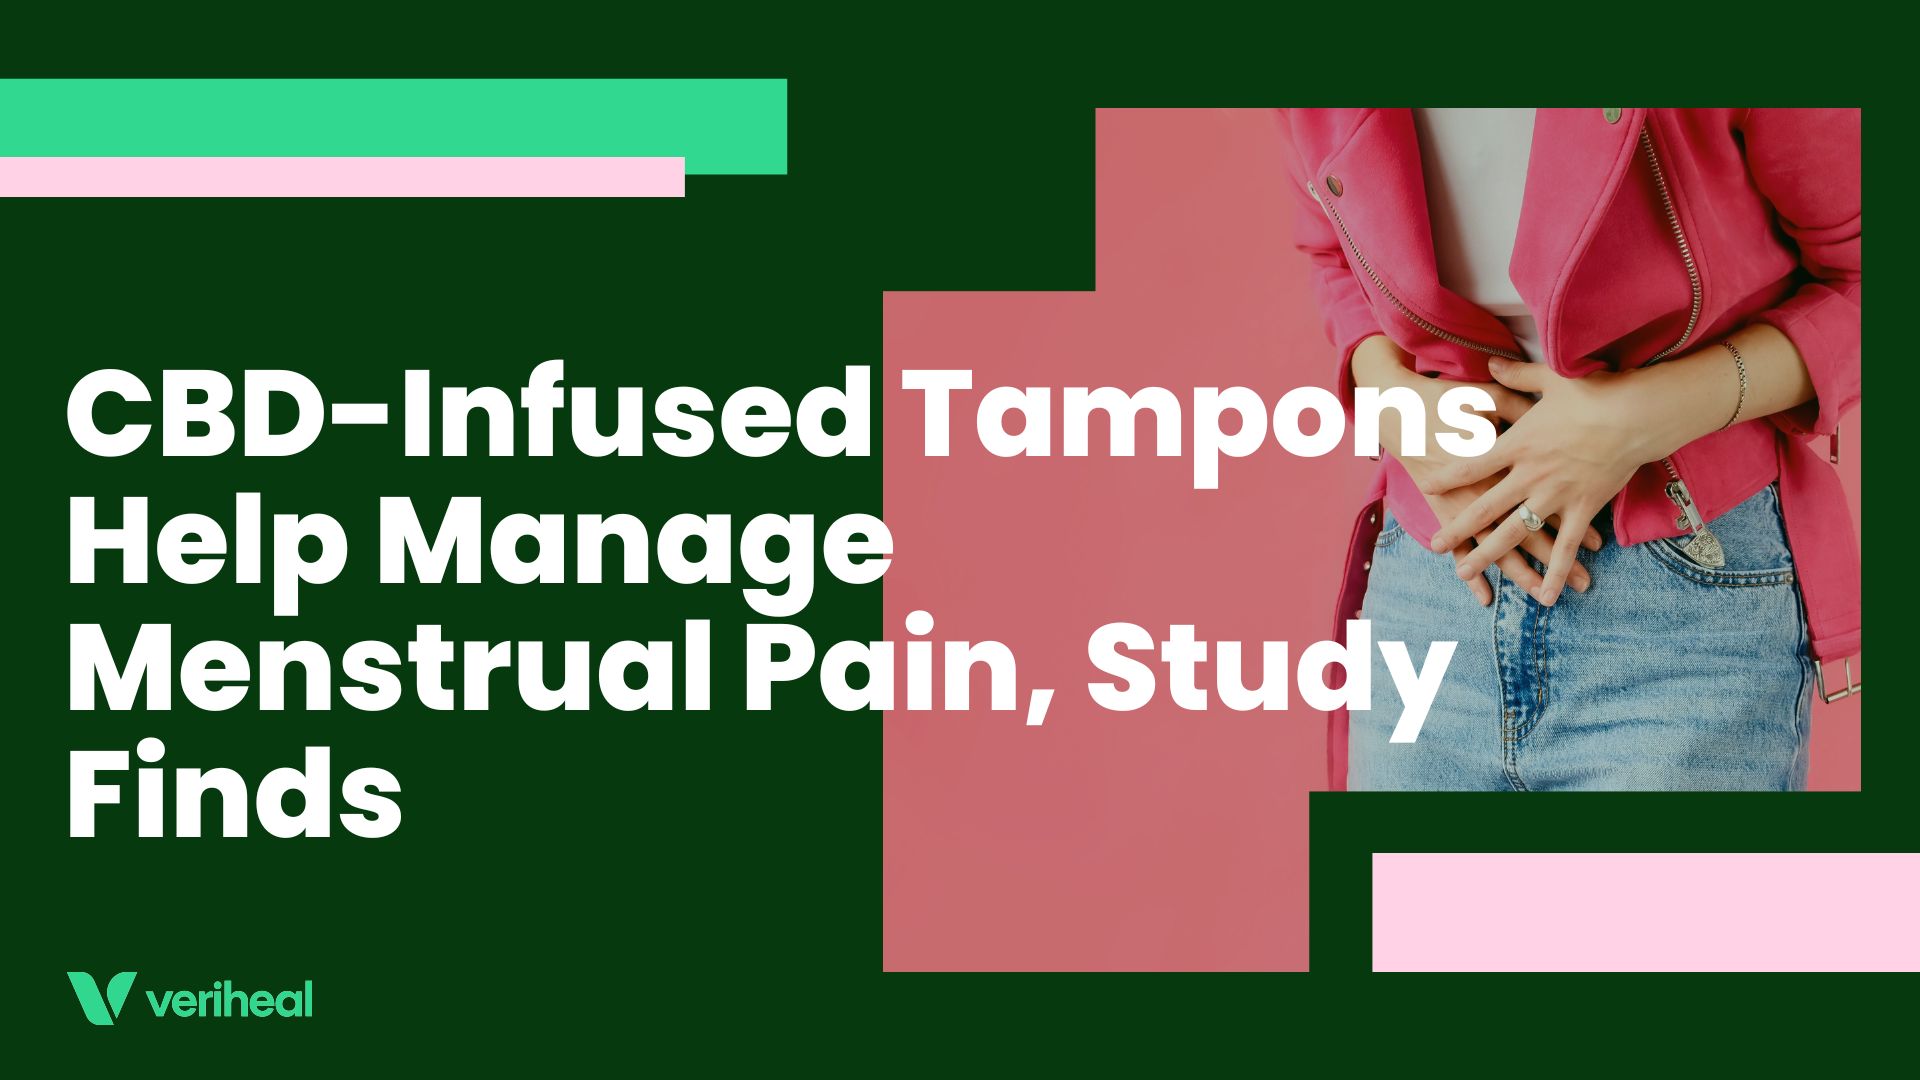 CBD-Infused Tampons Help Manage Menstrual Pain, Study Finds